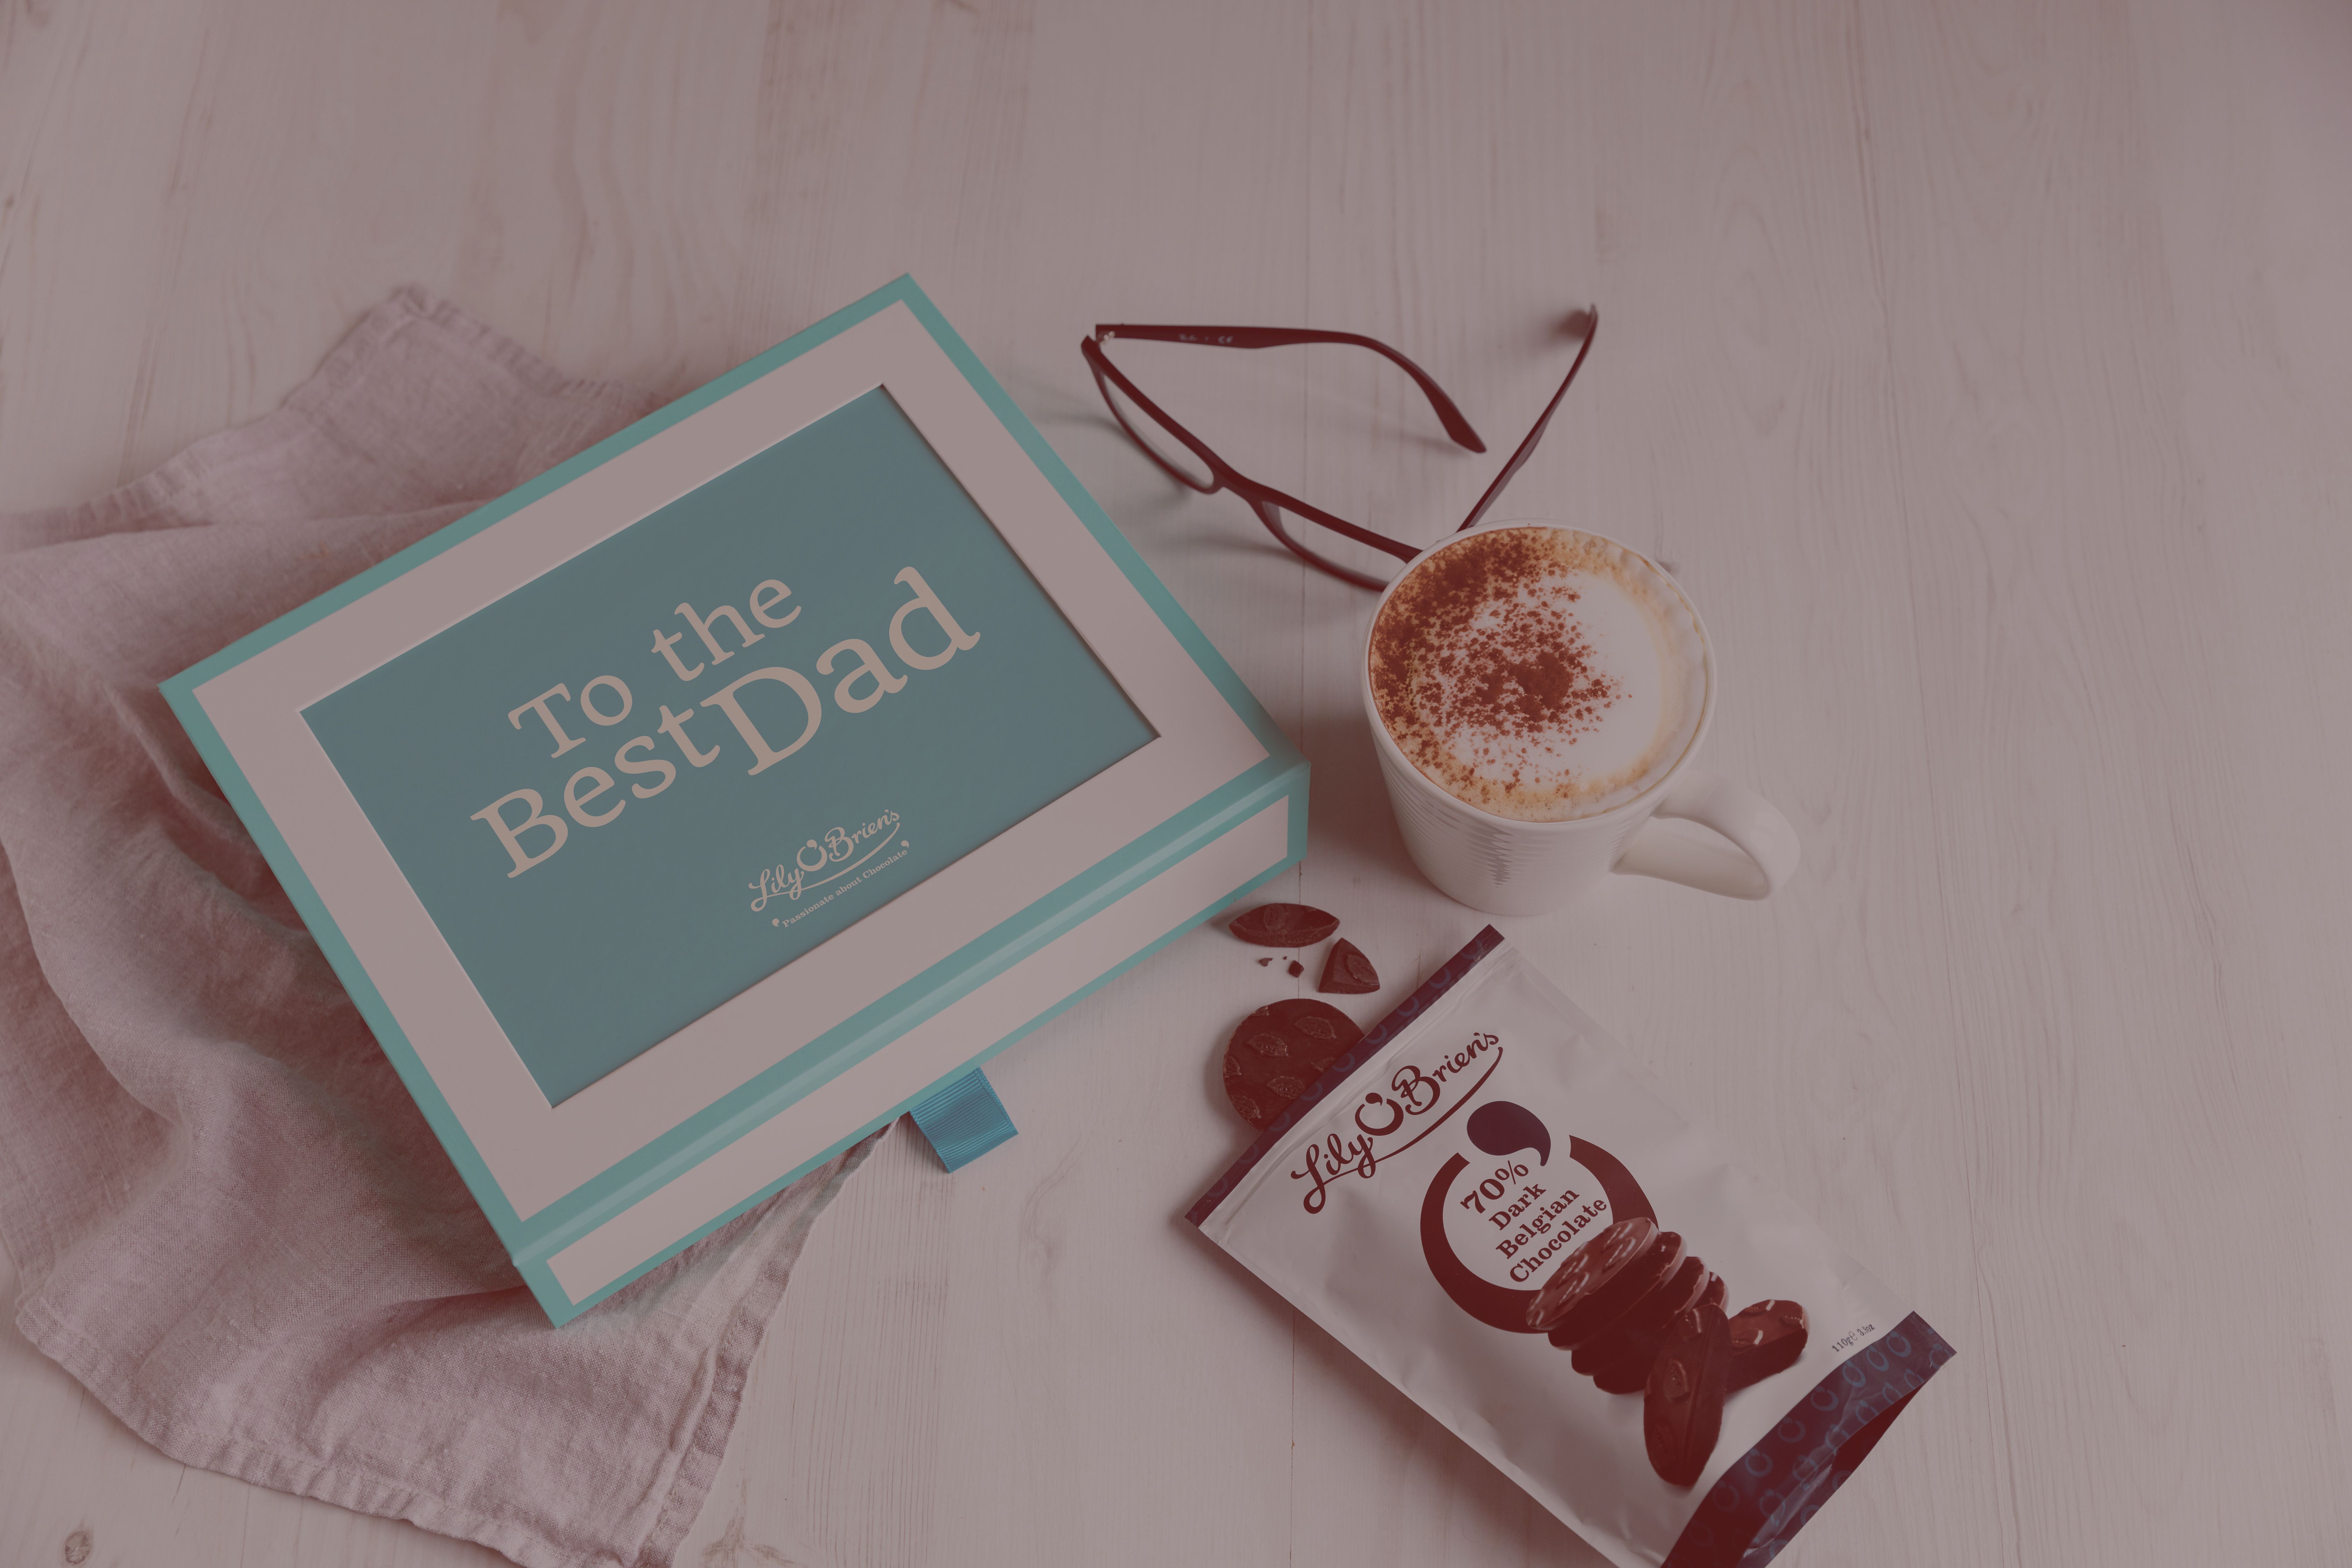 Father's Day personalised gifts by Lily O'Brien's Chocolates